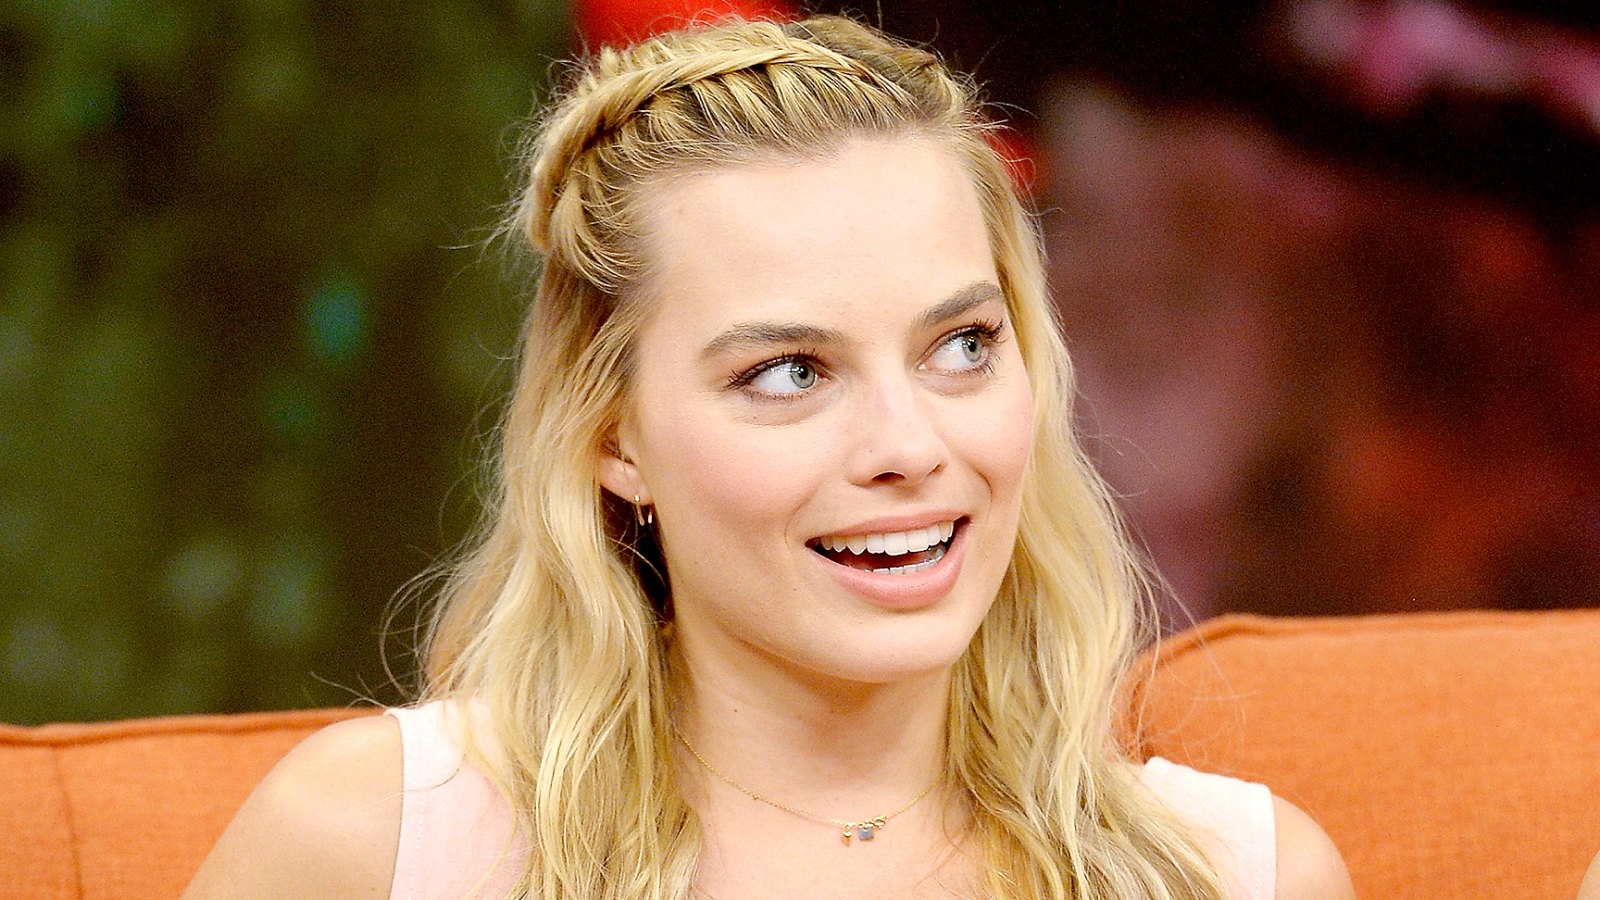 Margot Robbie on the set of Univisions "Despierta America" to support the film "suicide Squad" at Univision Studios on July 25, 2016 in Miami, Florida.